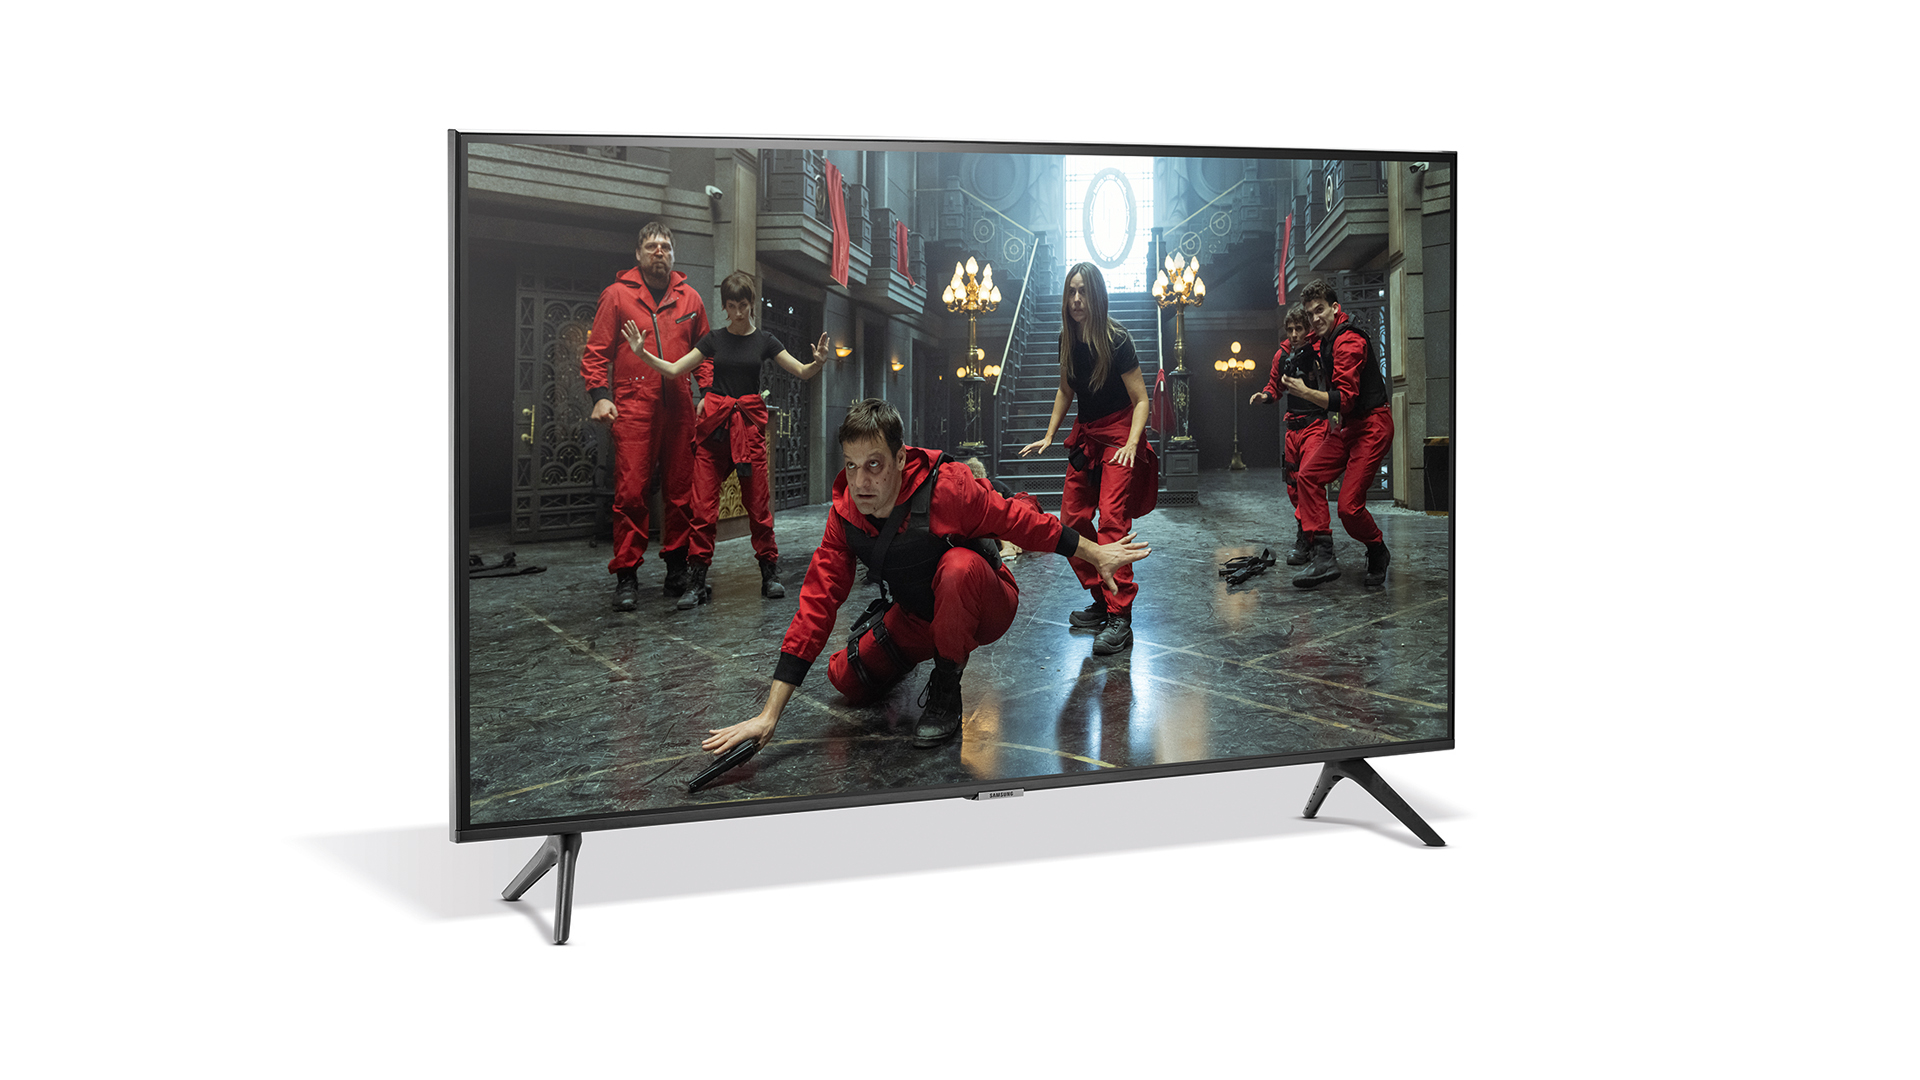 Samsung AU7100 65 Inch (2021) – Crystal 4K Smart TV With HDR10+ Image  Quality, Adaptive Sound, Motion Xcelerator Picture, Q-Symphony Audio And  Gaming